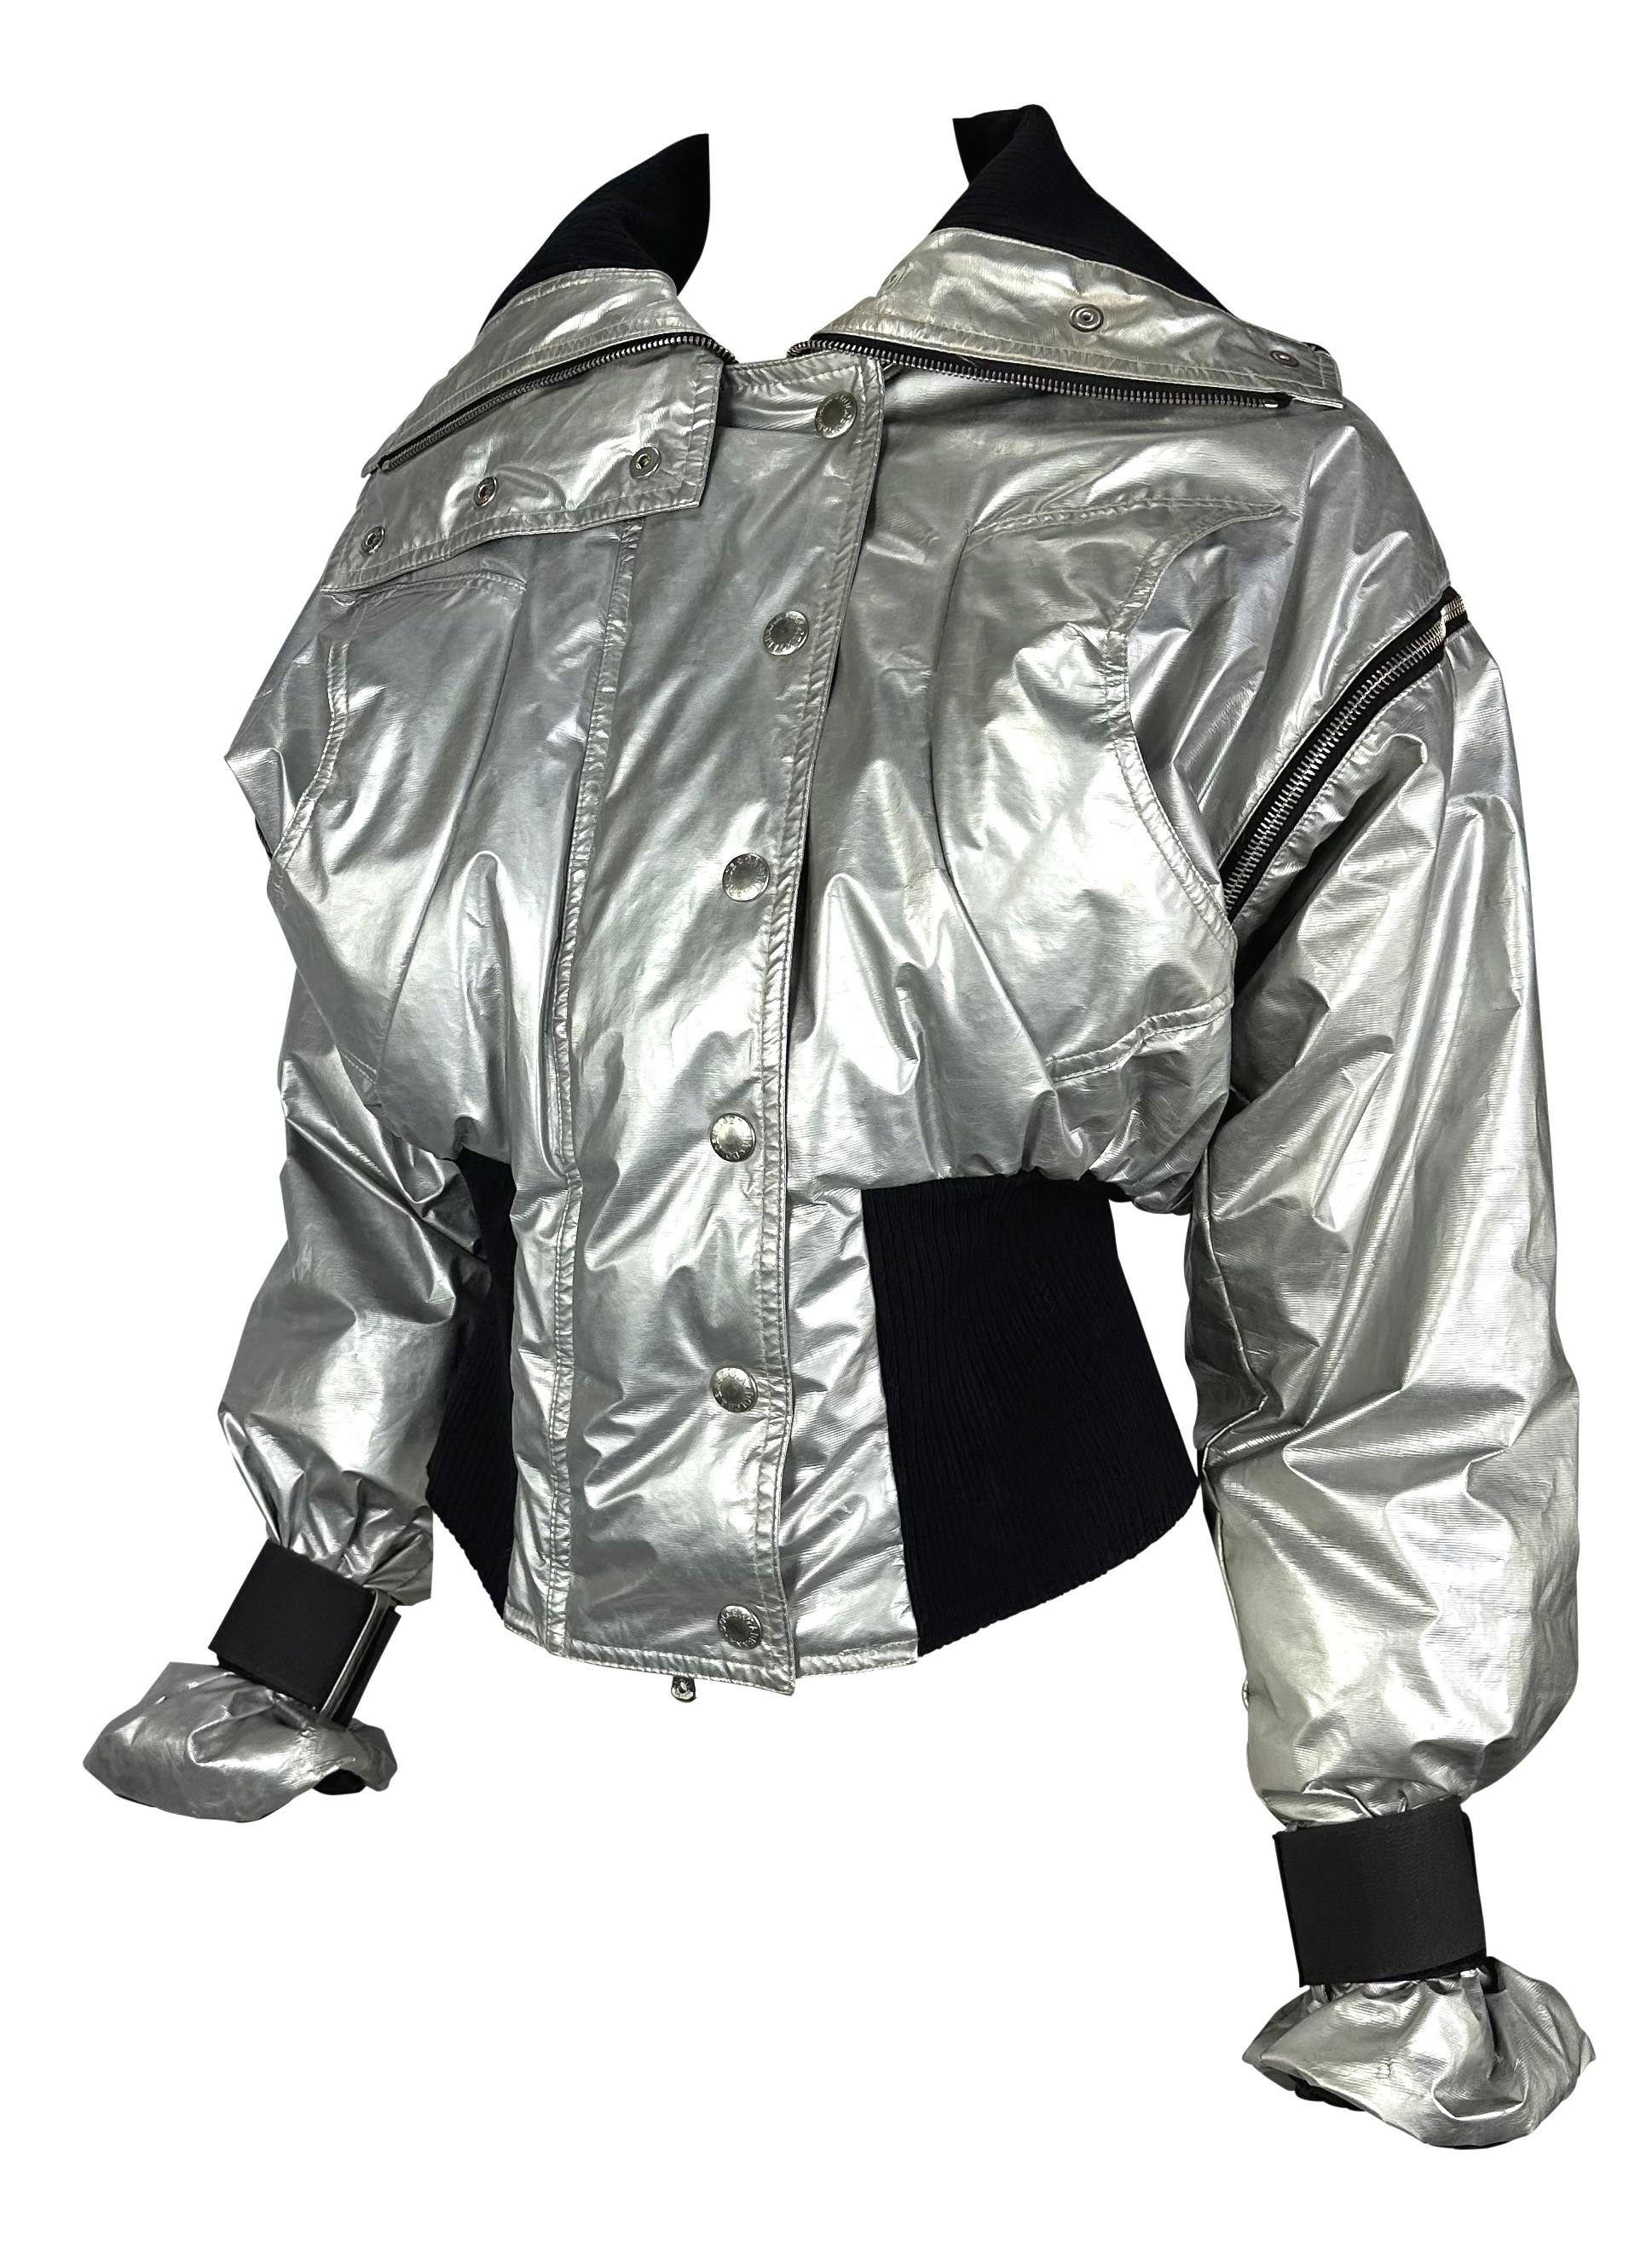 Presenting a fabulous silver metallic Dolce and Gabbana puffer jacket. From the Fall/Winter 2003 collection, this incredible oversized jacket features snap closures at the front, zippers around the shoulders, and velcro wraps at the wrists. The